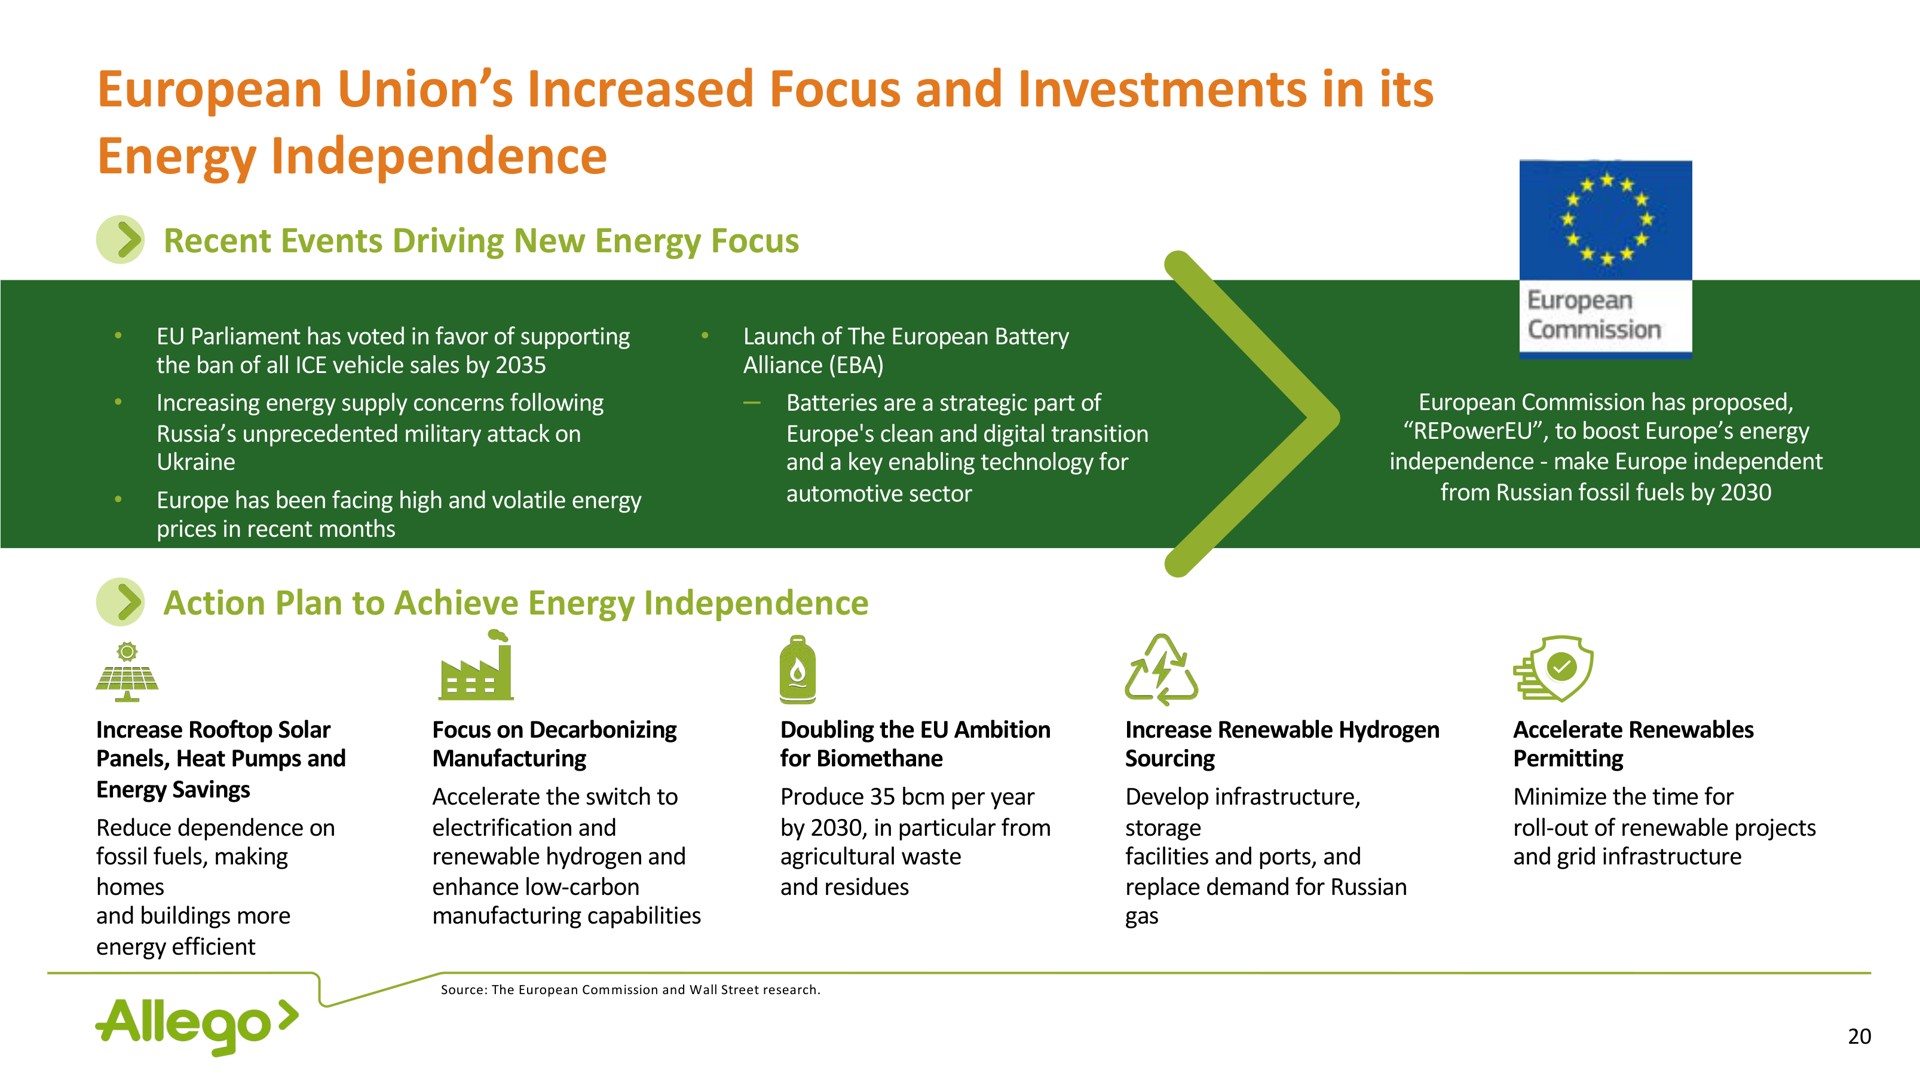 union increased focus and investments in its energy independence | Allego